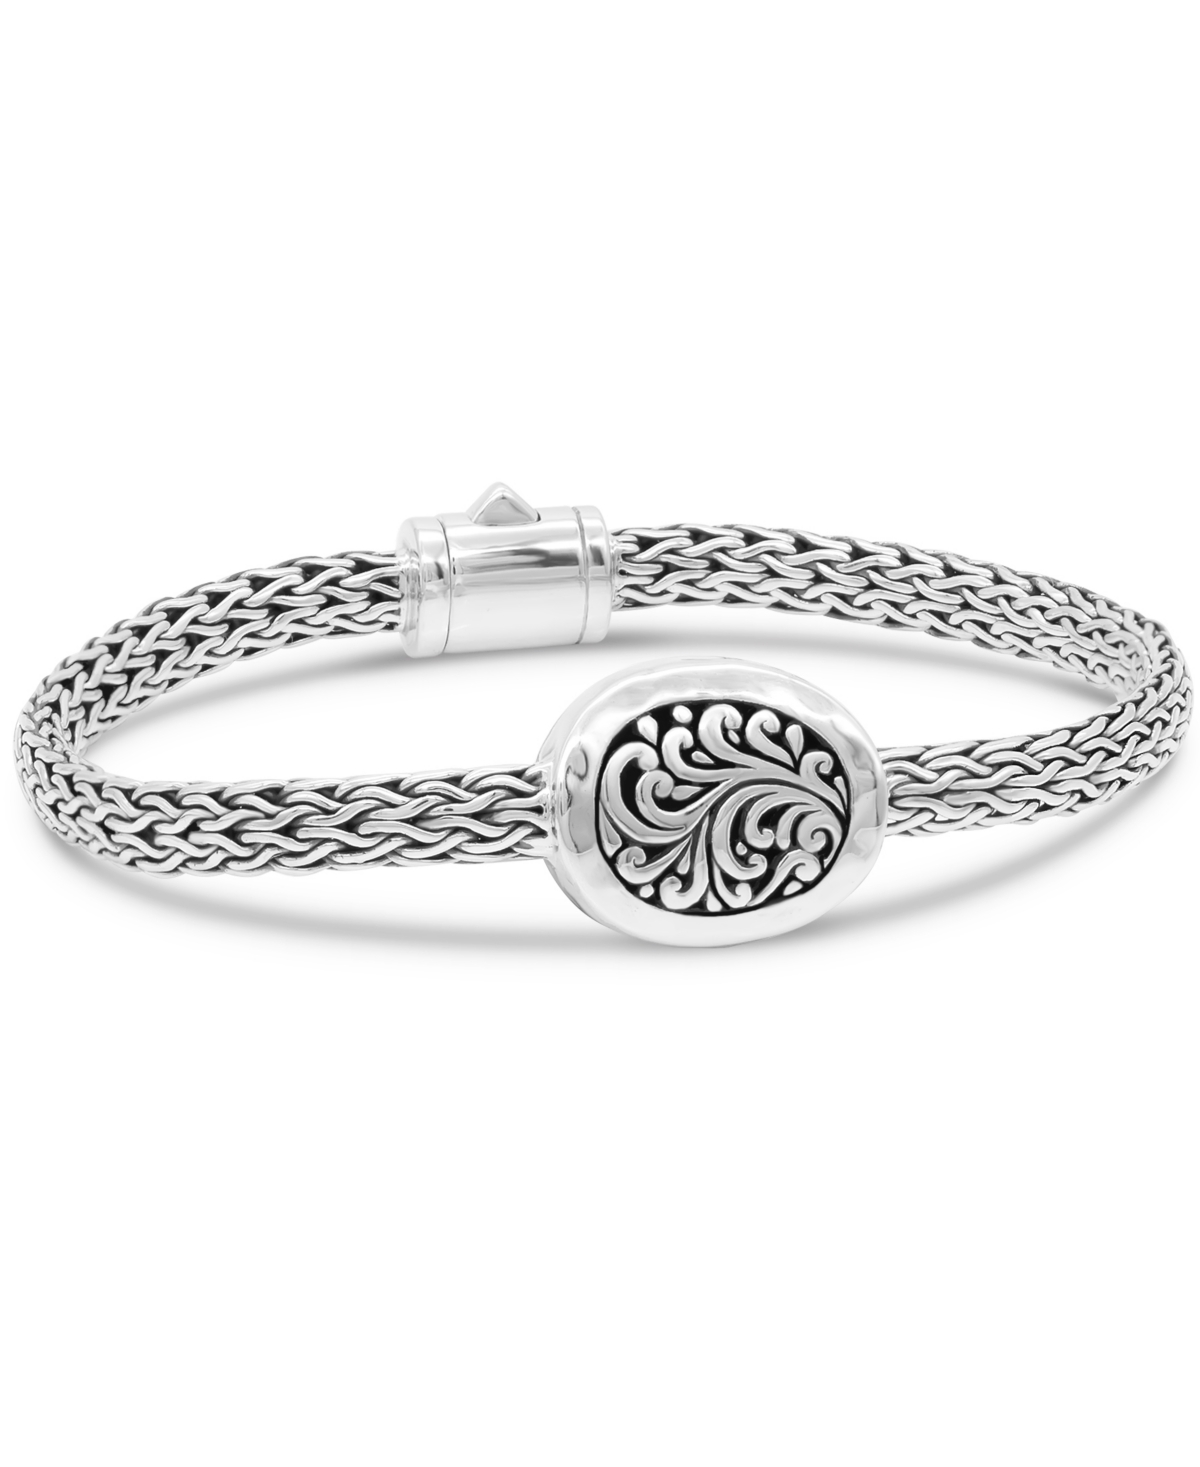 Bali Filigree with Hammer Accent with Dragon Bone Chain Bracelet in Sterling Silver - Silver